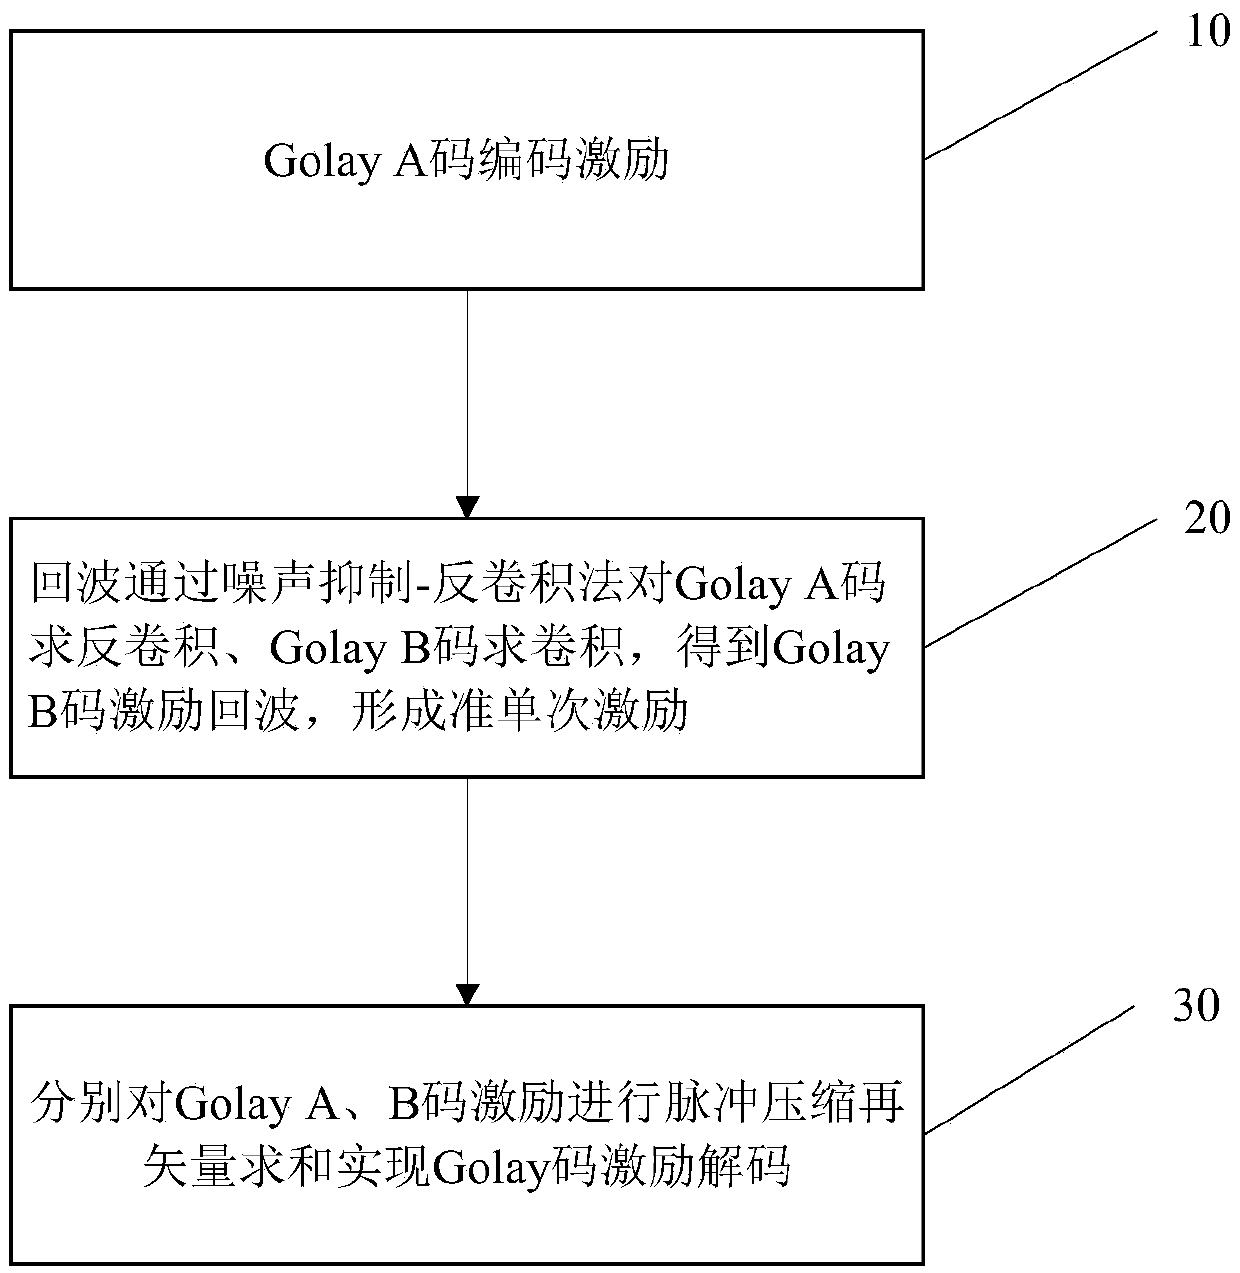 Quasi one-time orthogonal complementary Golay (A,B) code ultrasonic phased array coded excitation method